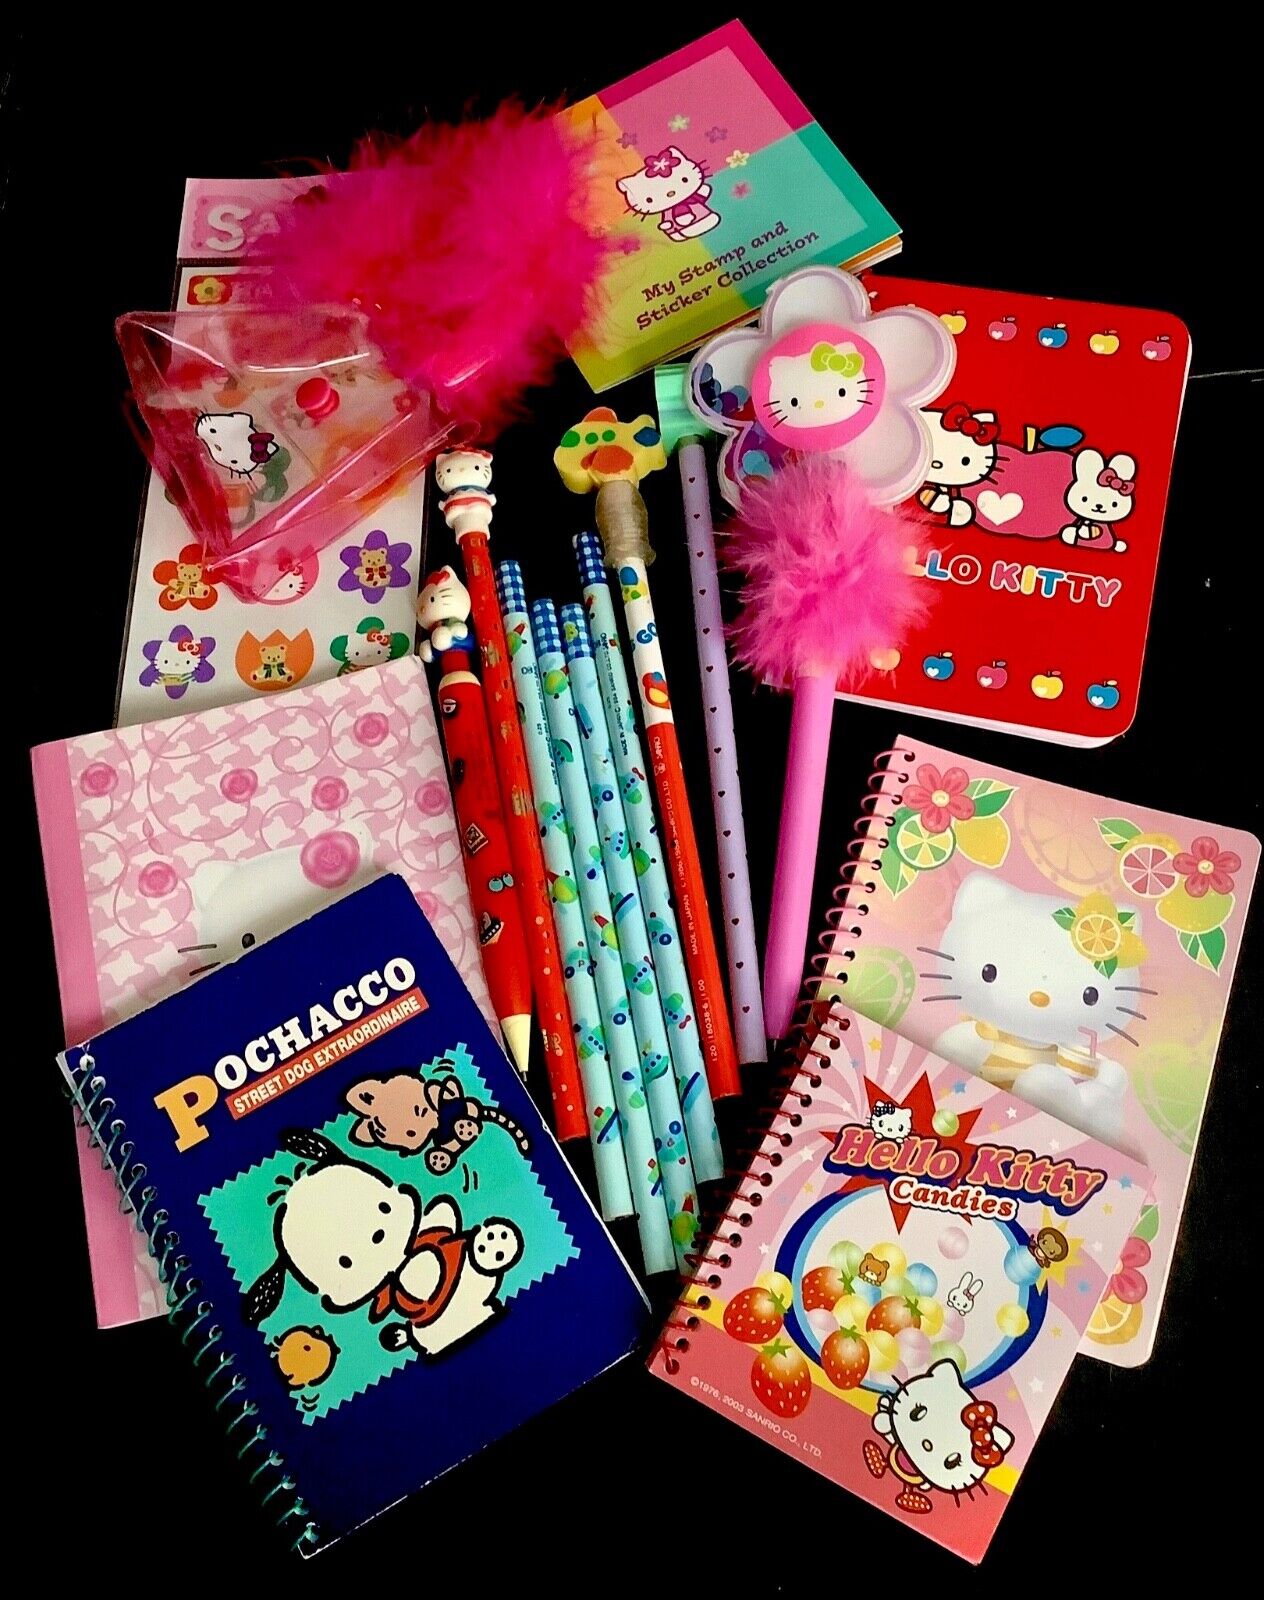 Vintage Sanrio Lot of Hello Kitty Pencils Notepads Stickers